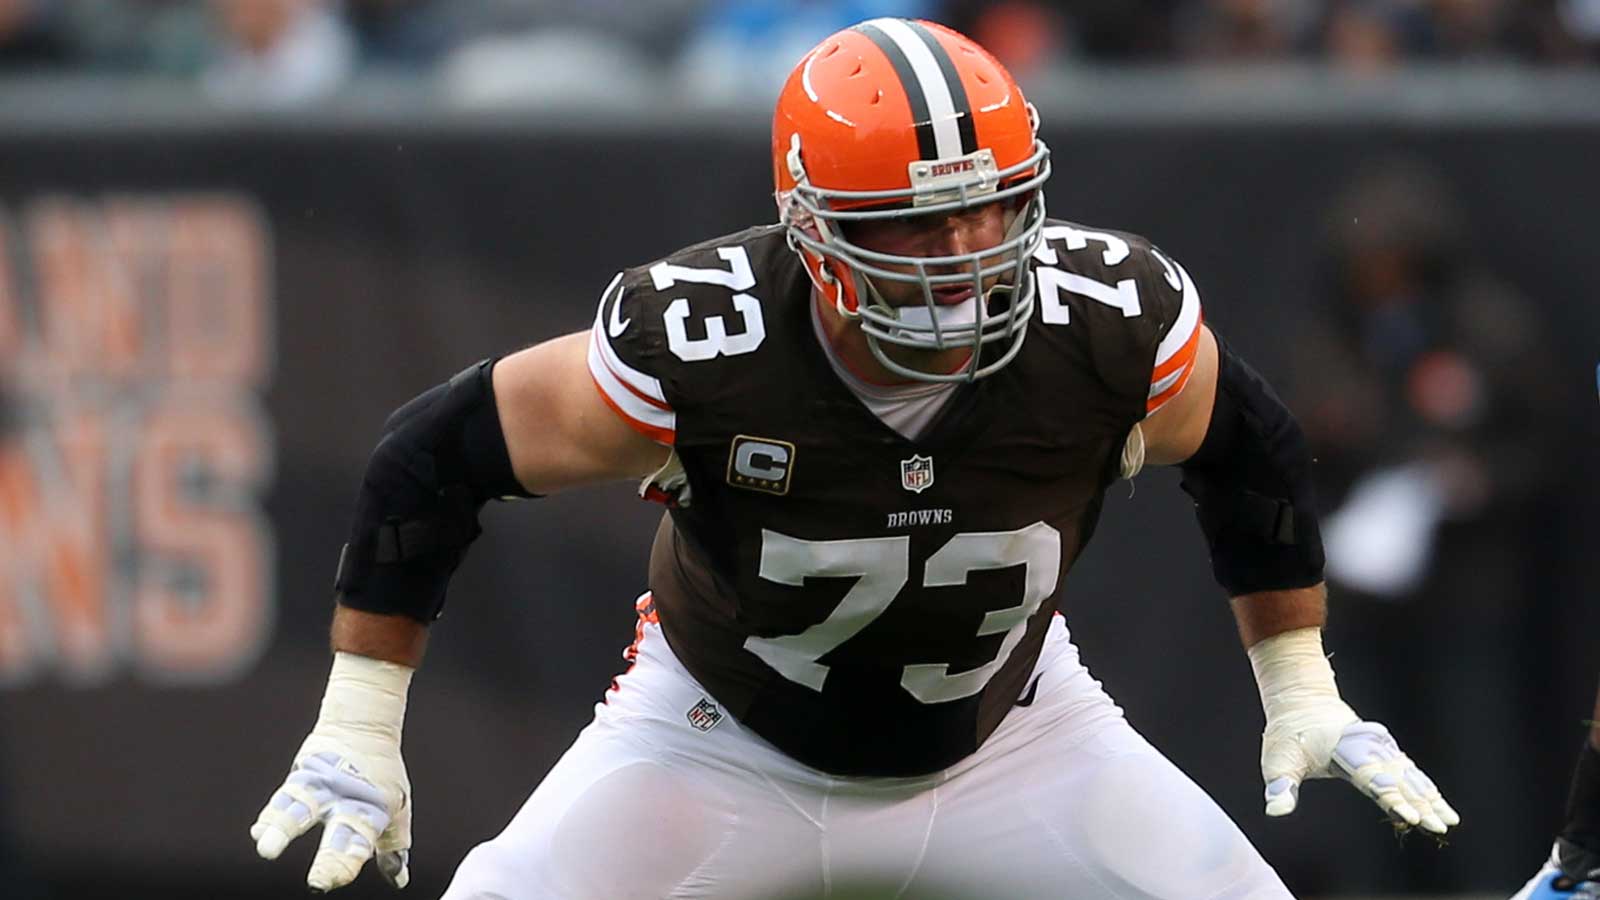 ARE EAGLES TEEING UP A TRADE FOR BROWNS' LT JOE THOMAS?